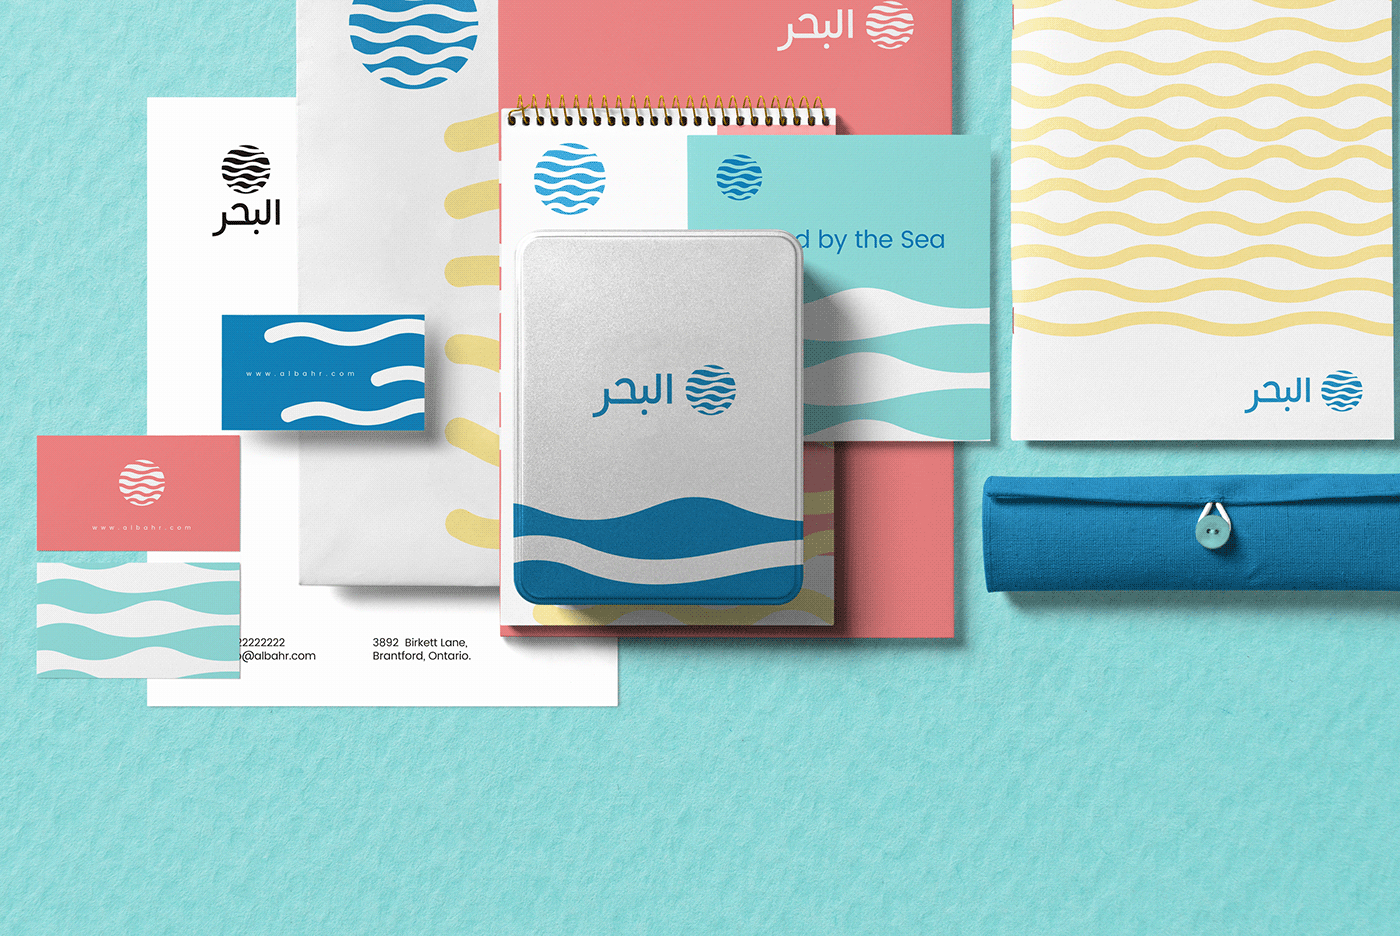 albahr branding  company design logo manufacturing products sea waves